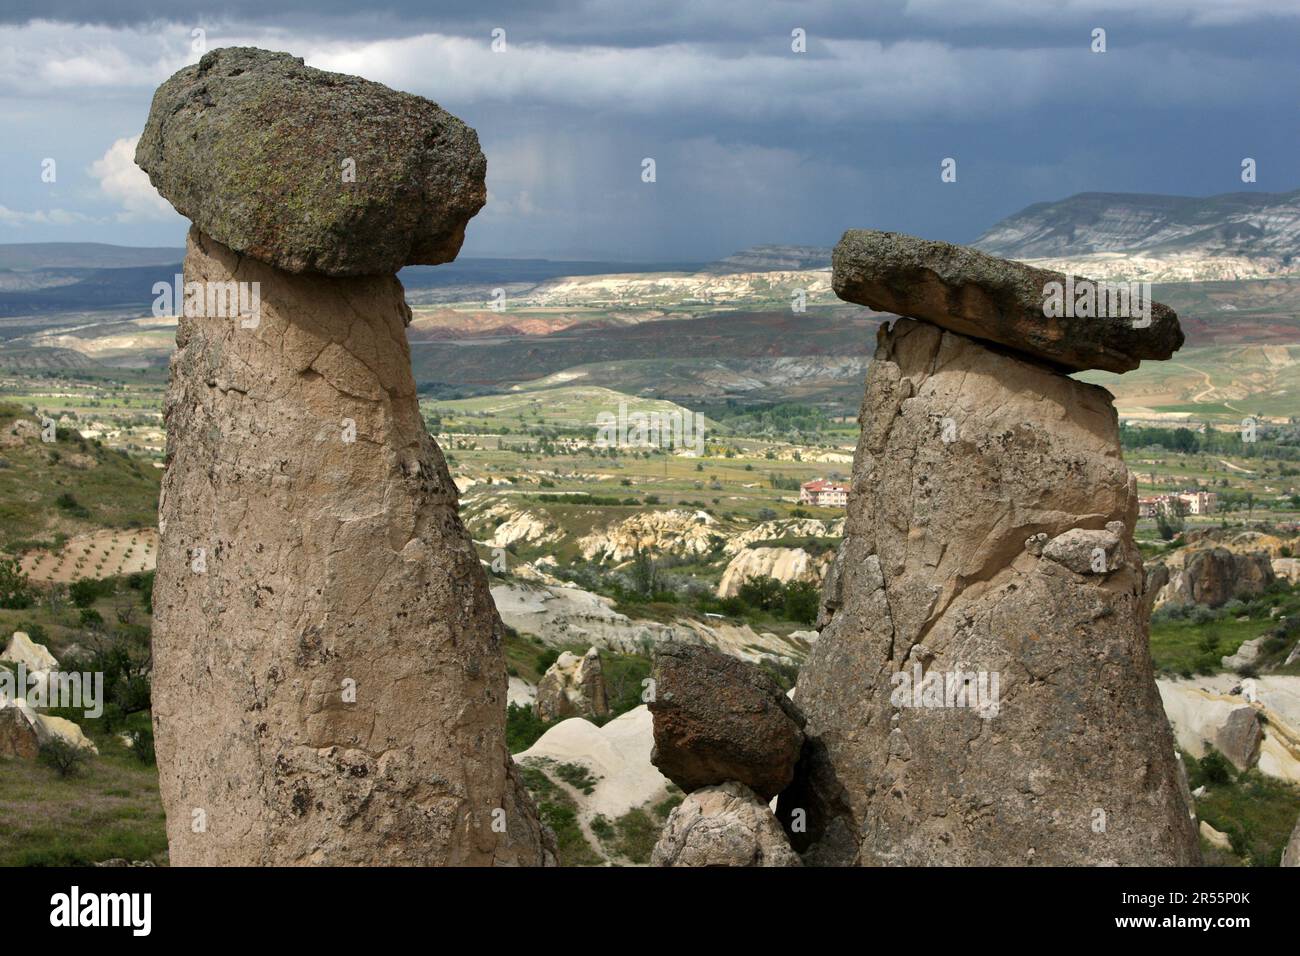 Unique volcanic rock formations known as fairy chimneys located at Urgup in the Cappadocia region of Turkiye. Stock Photo